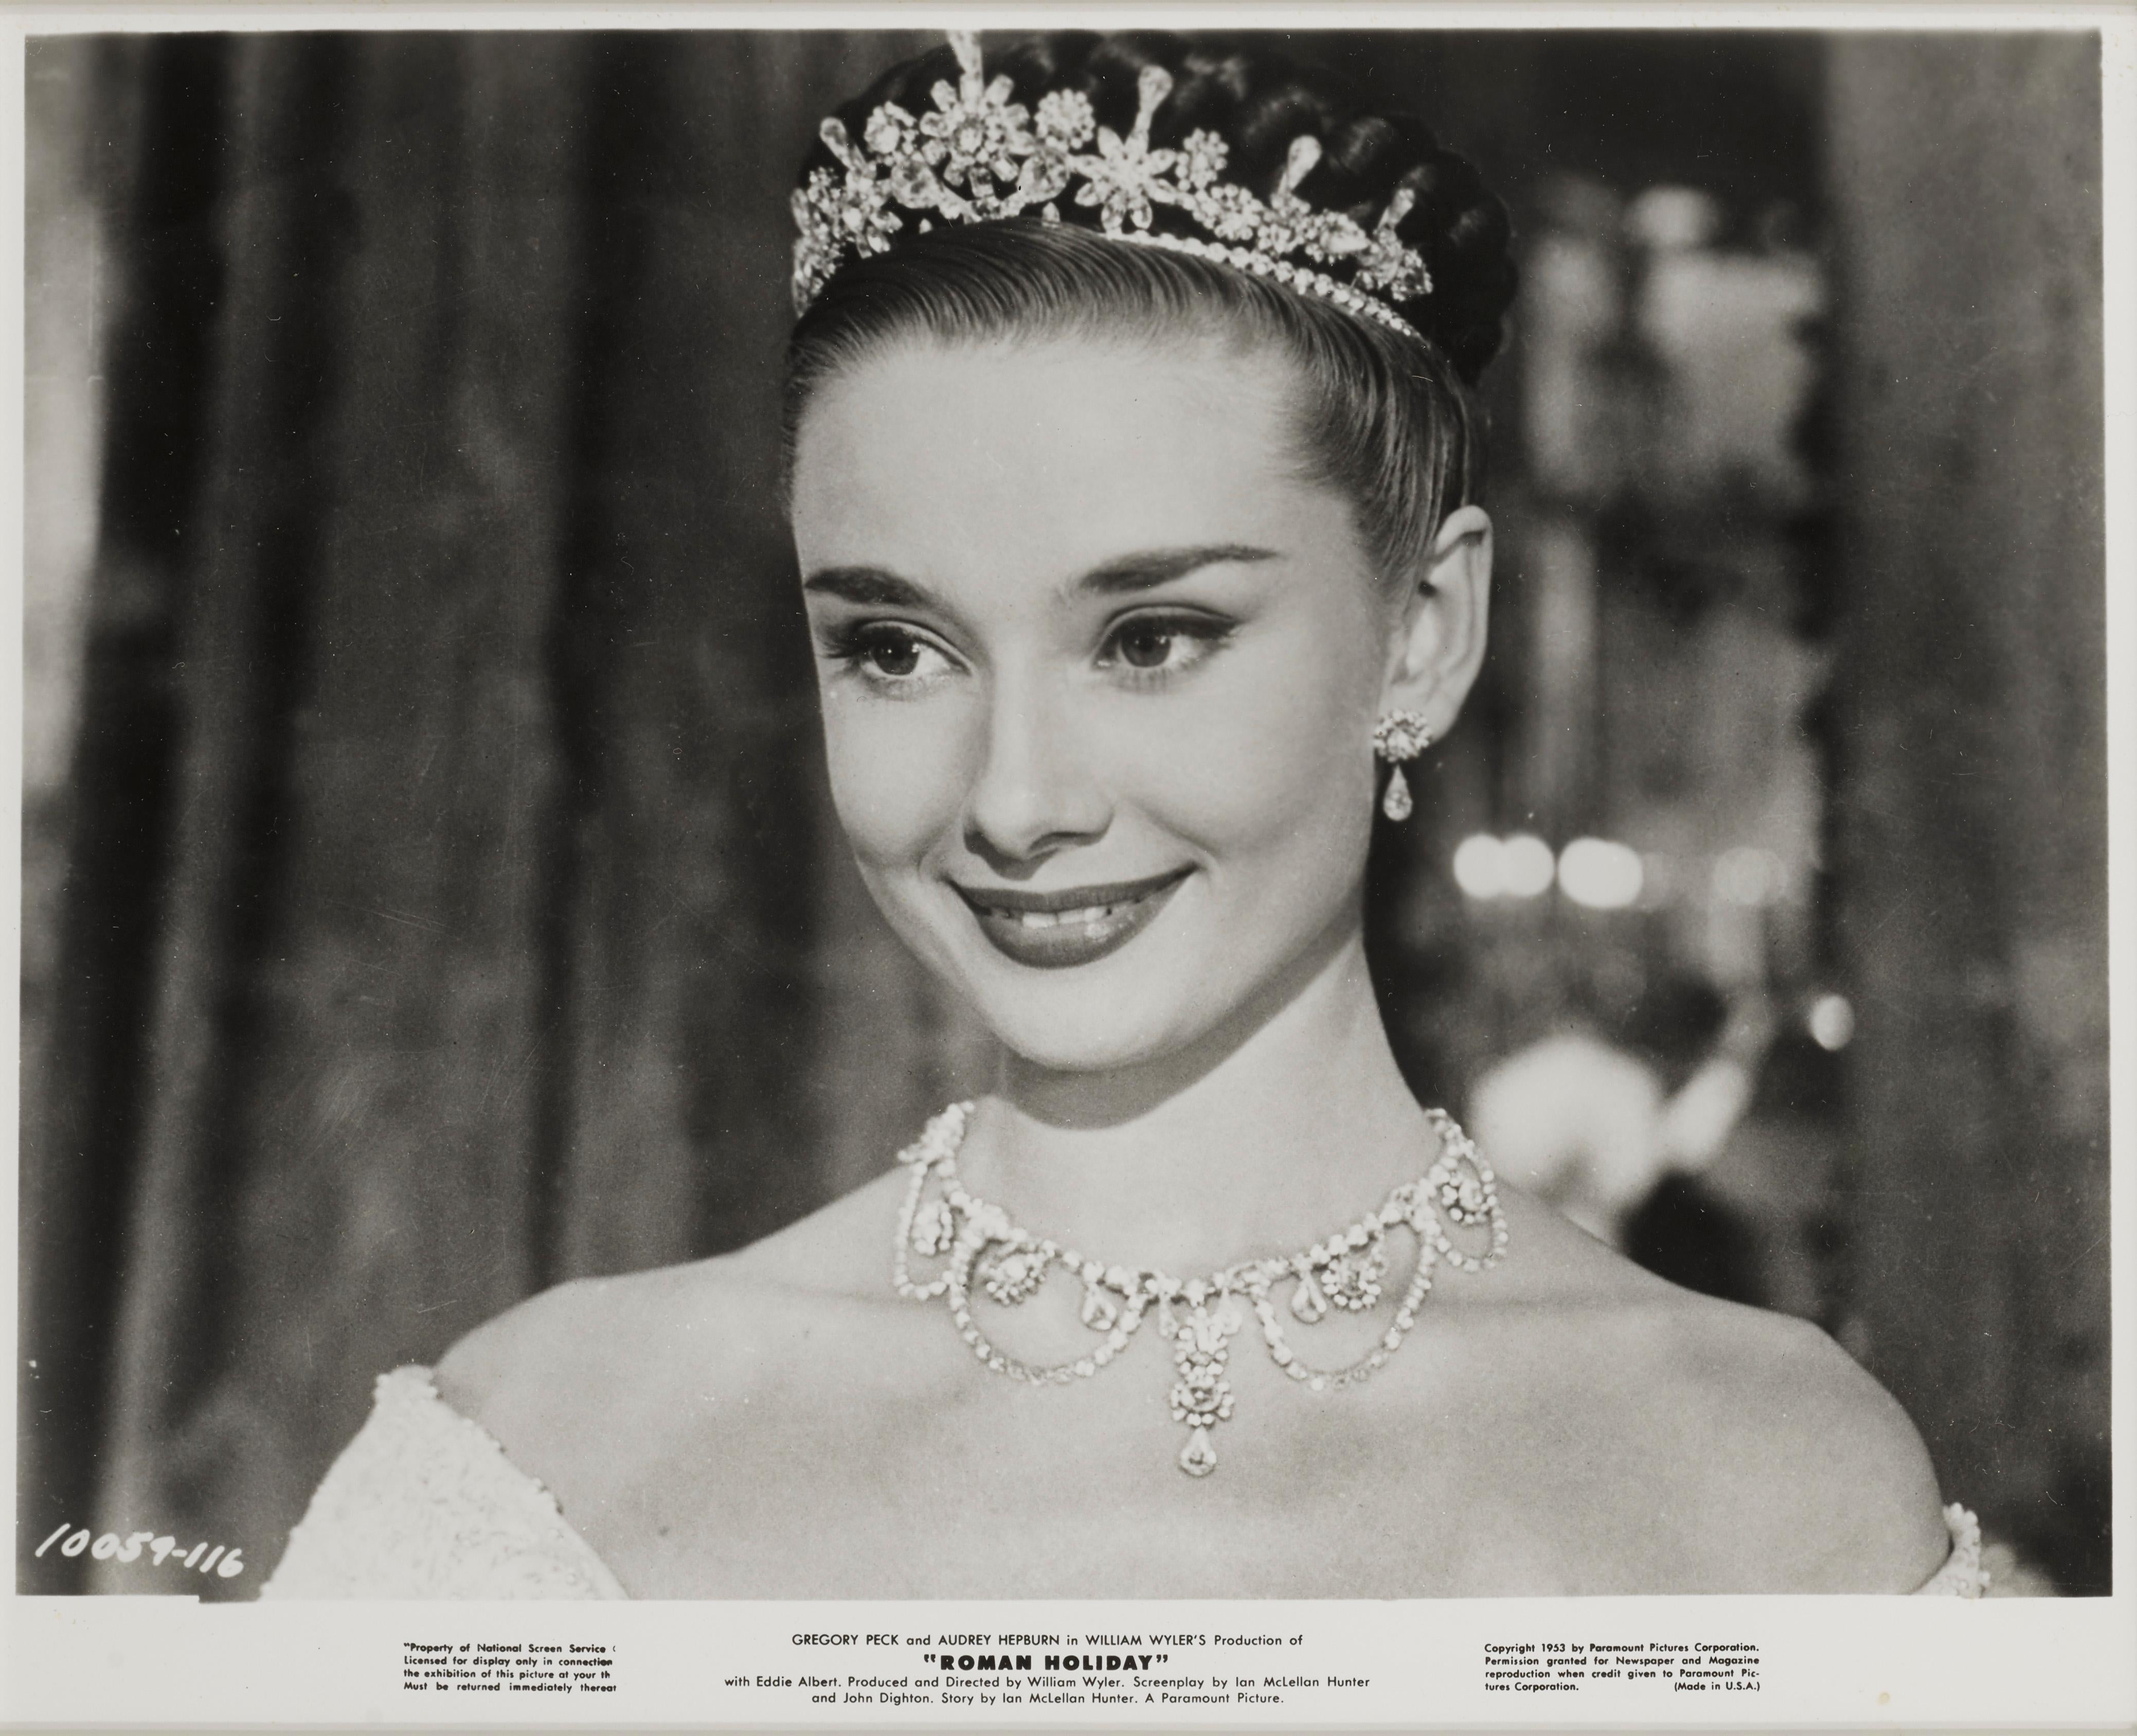 Original US photographic production still from Paramount Pictures used to promote the film Roman Holiday.
Gregory Peck and Audrey Hepburn's Classic, 1953 romance directed by William Wyler.
This piece is conservation framed and would be shipped